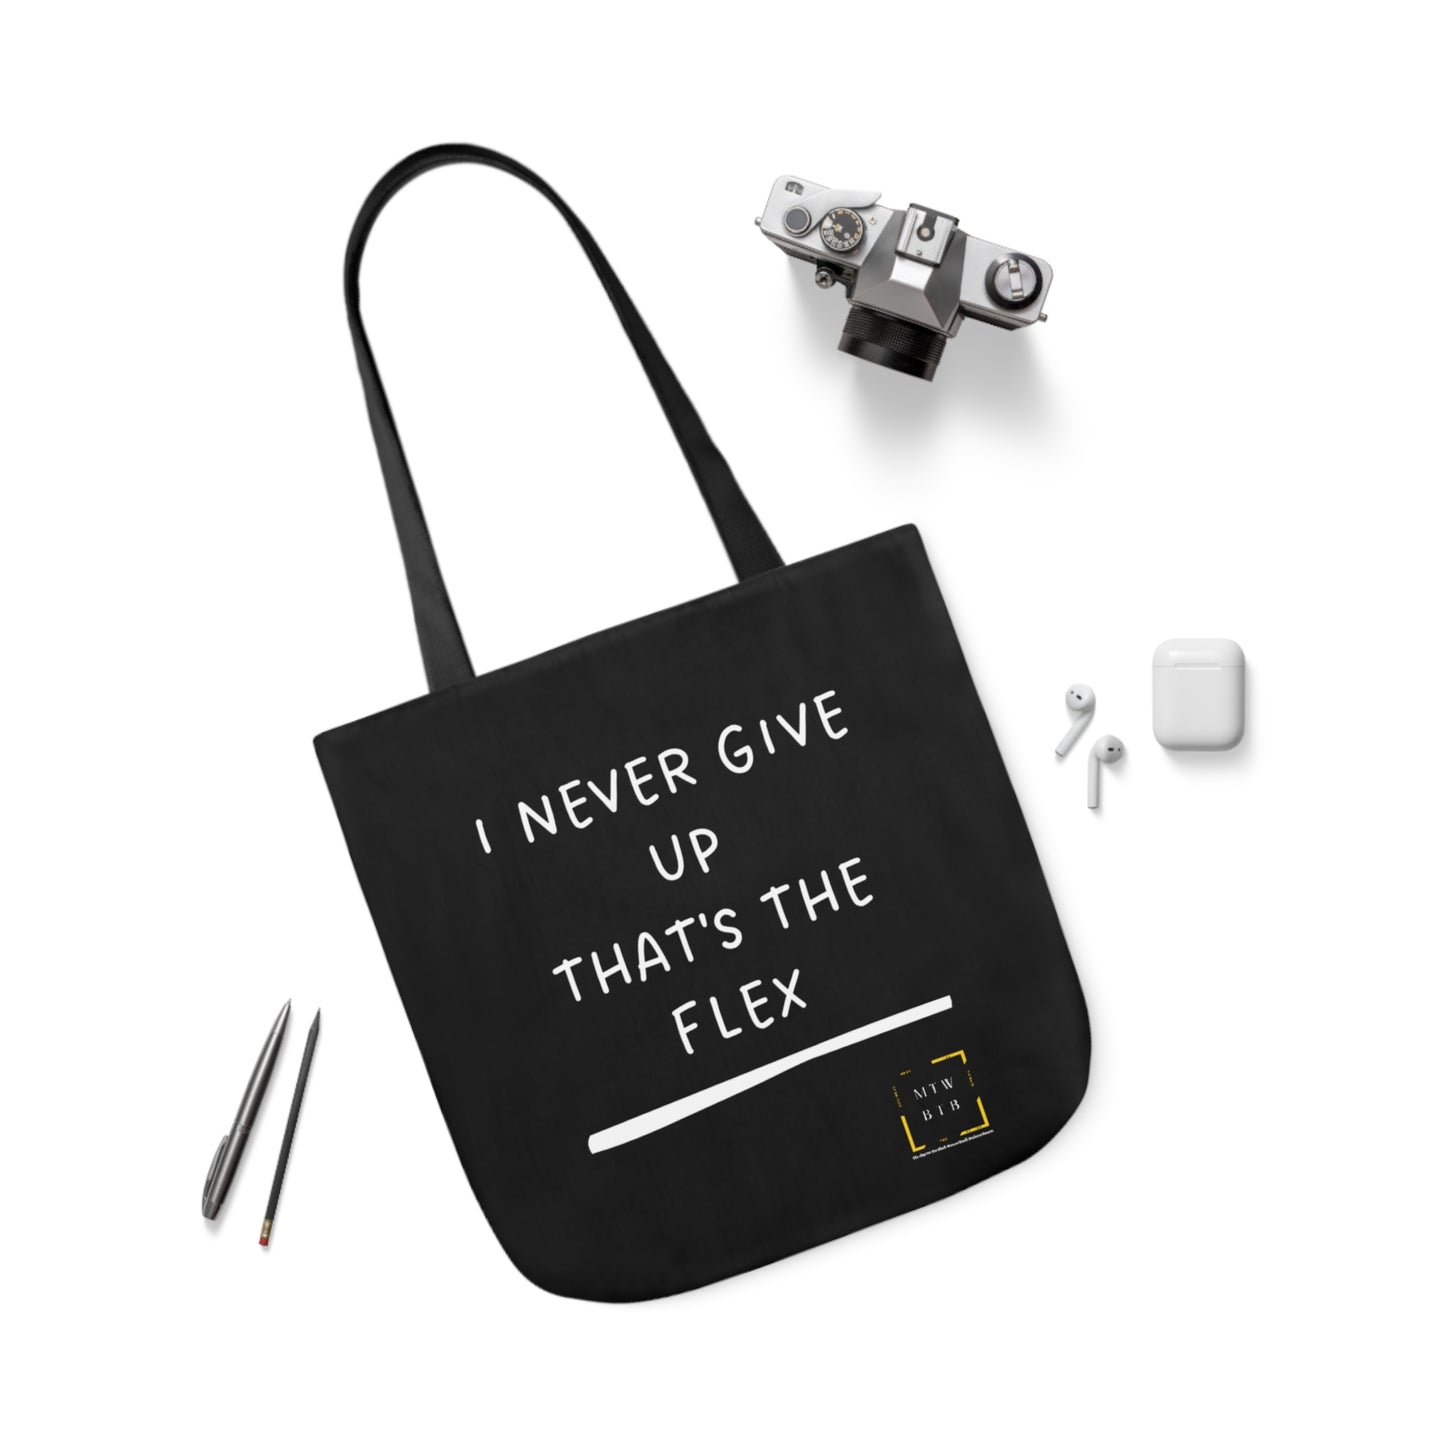 I Never Give Up Canvas Tote Bag